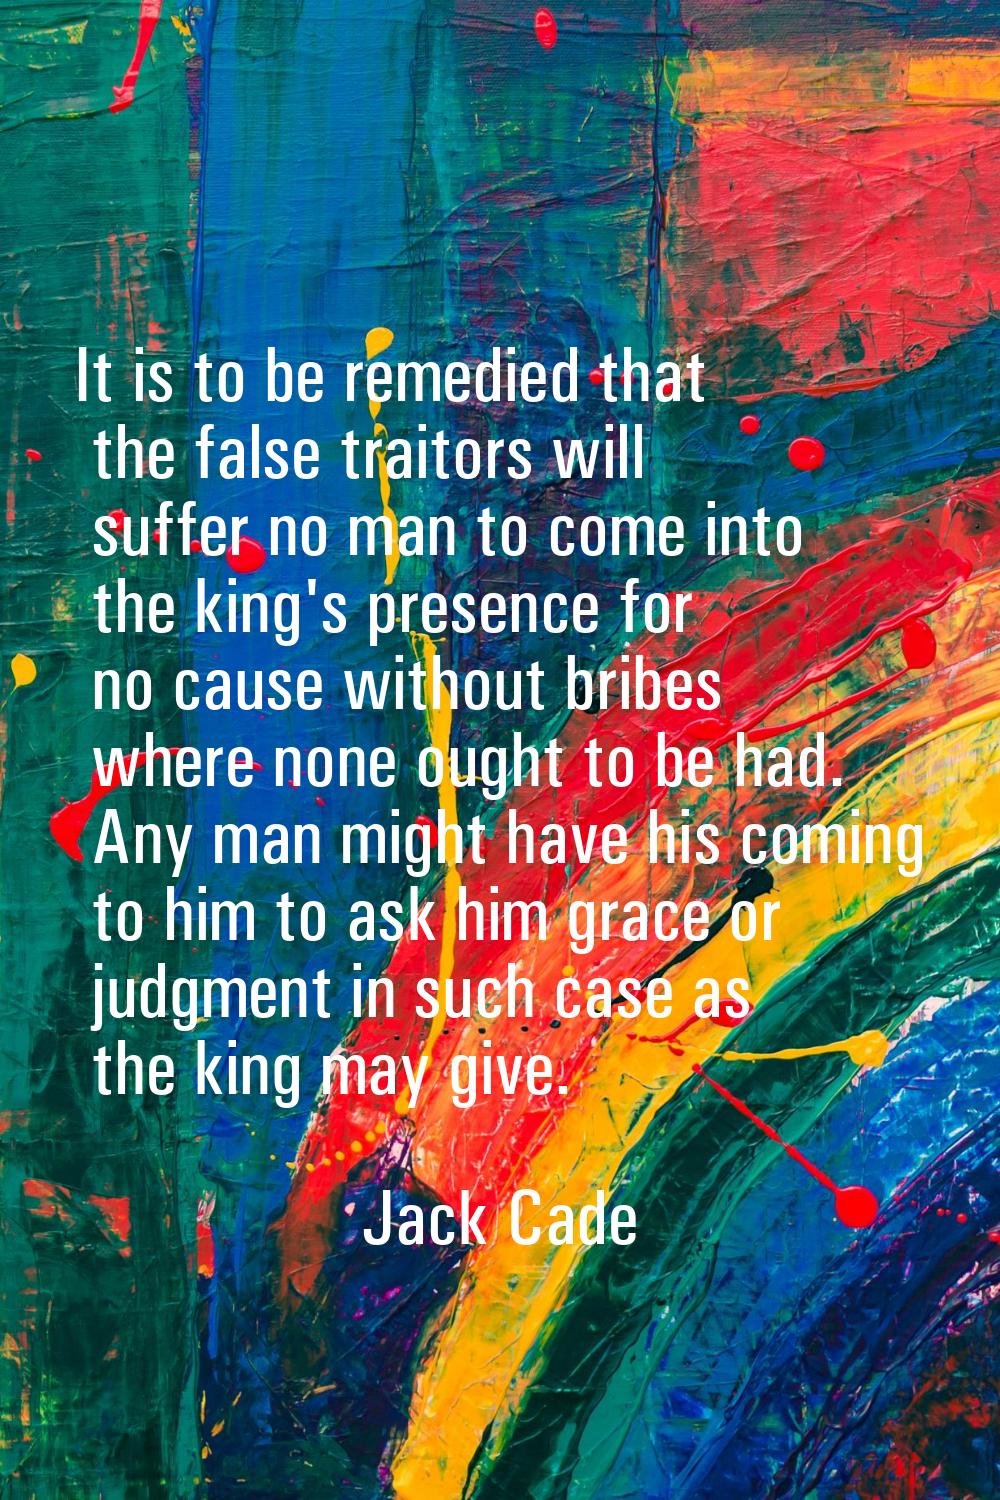 It is to be remedied that the false traitors will suffer no man to come into the king's presence fo